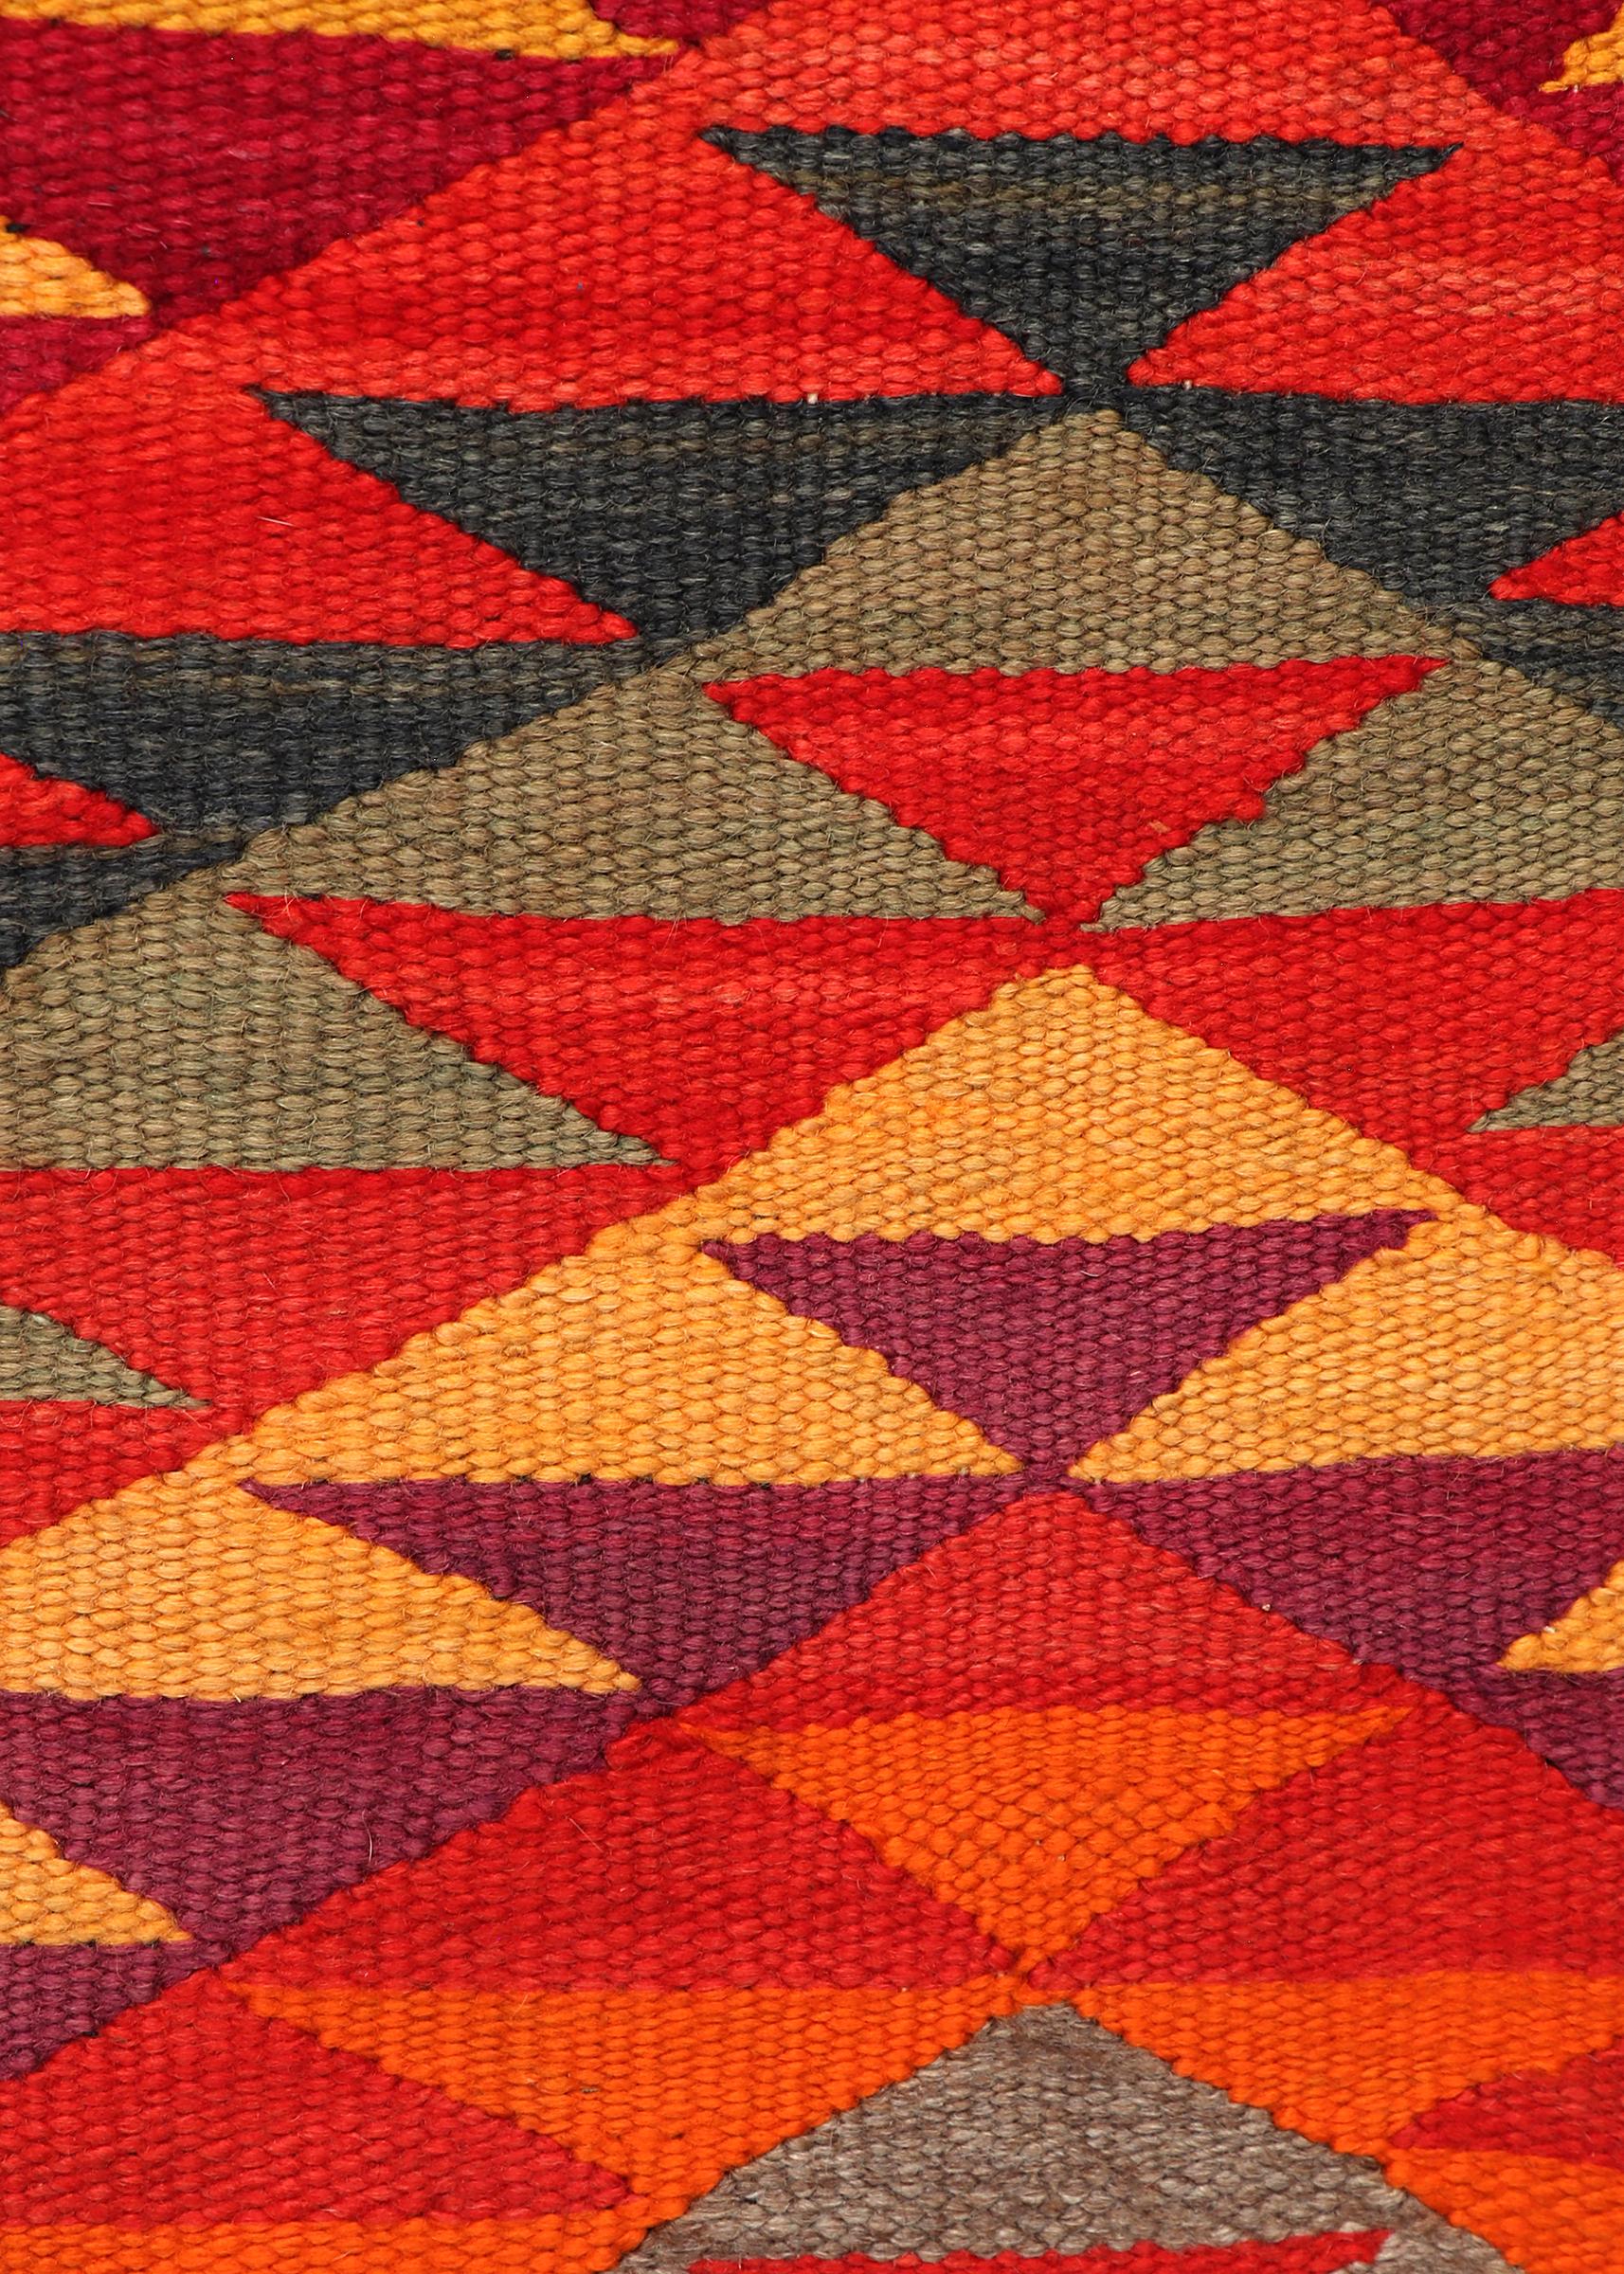 Dyed 1885 Navajo Weaving in Jewel Tones, Red, Yellow, Orange, and Brown